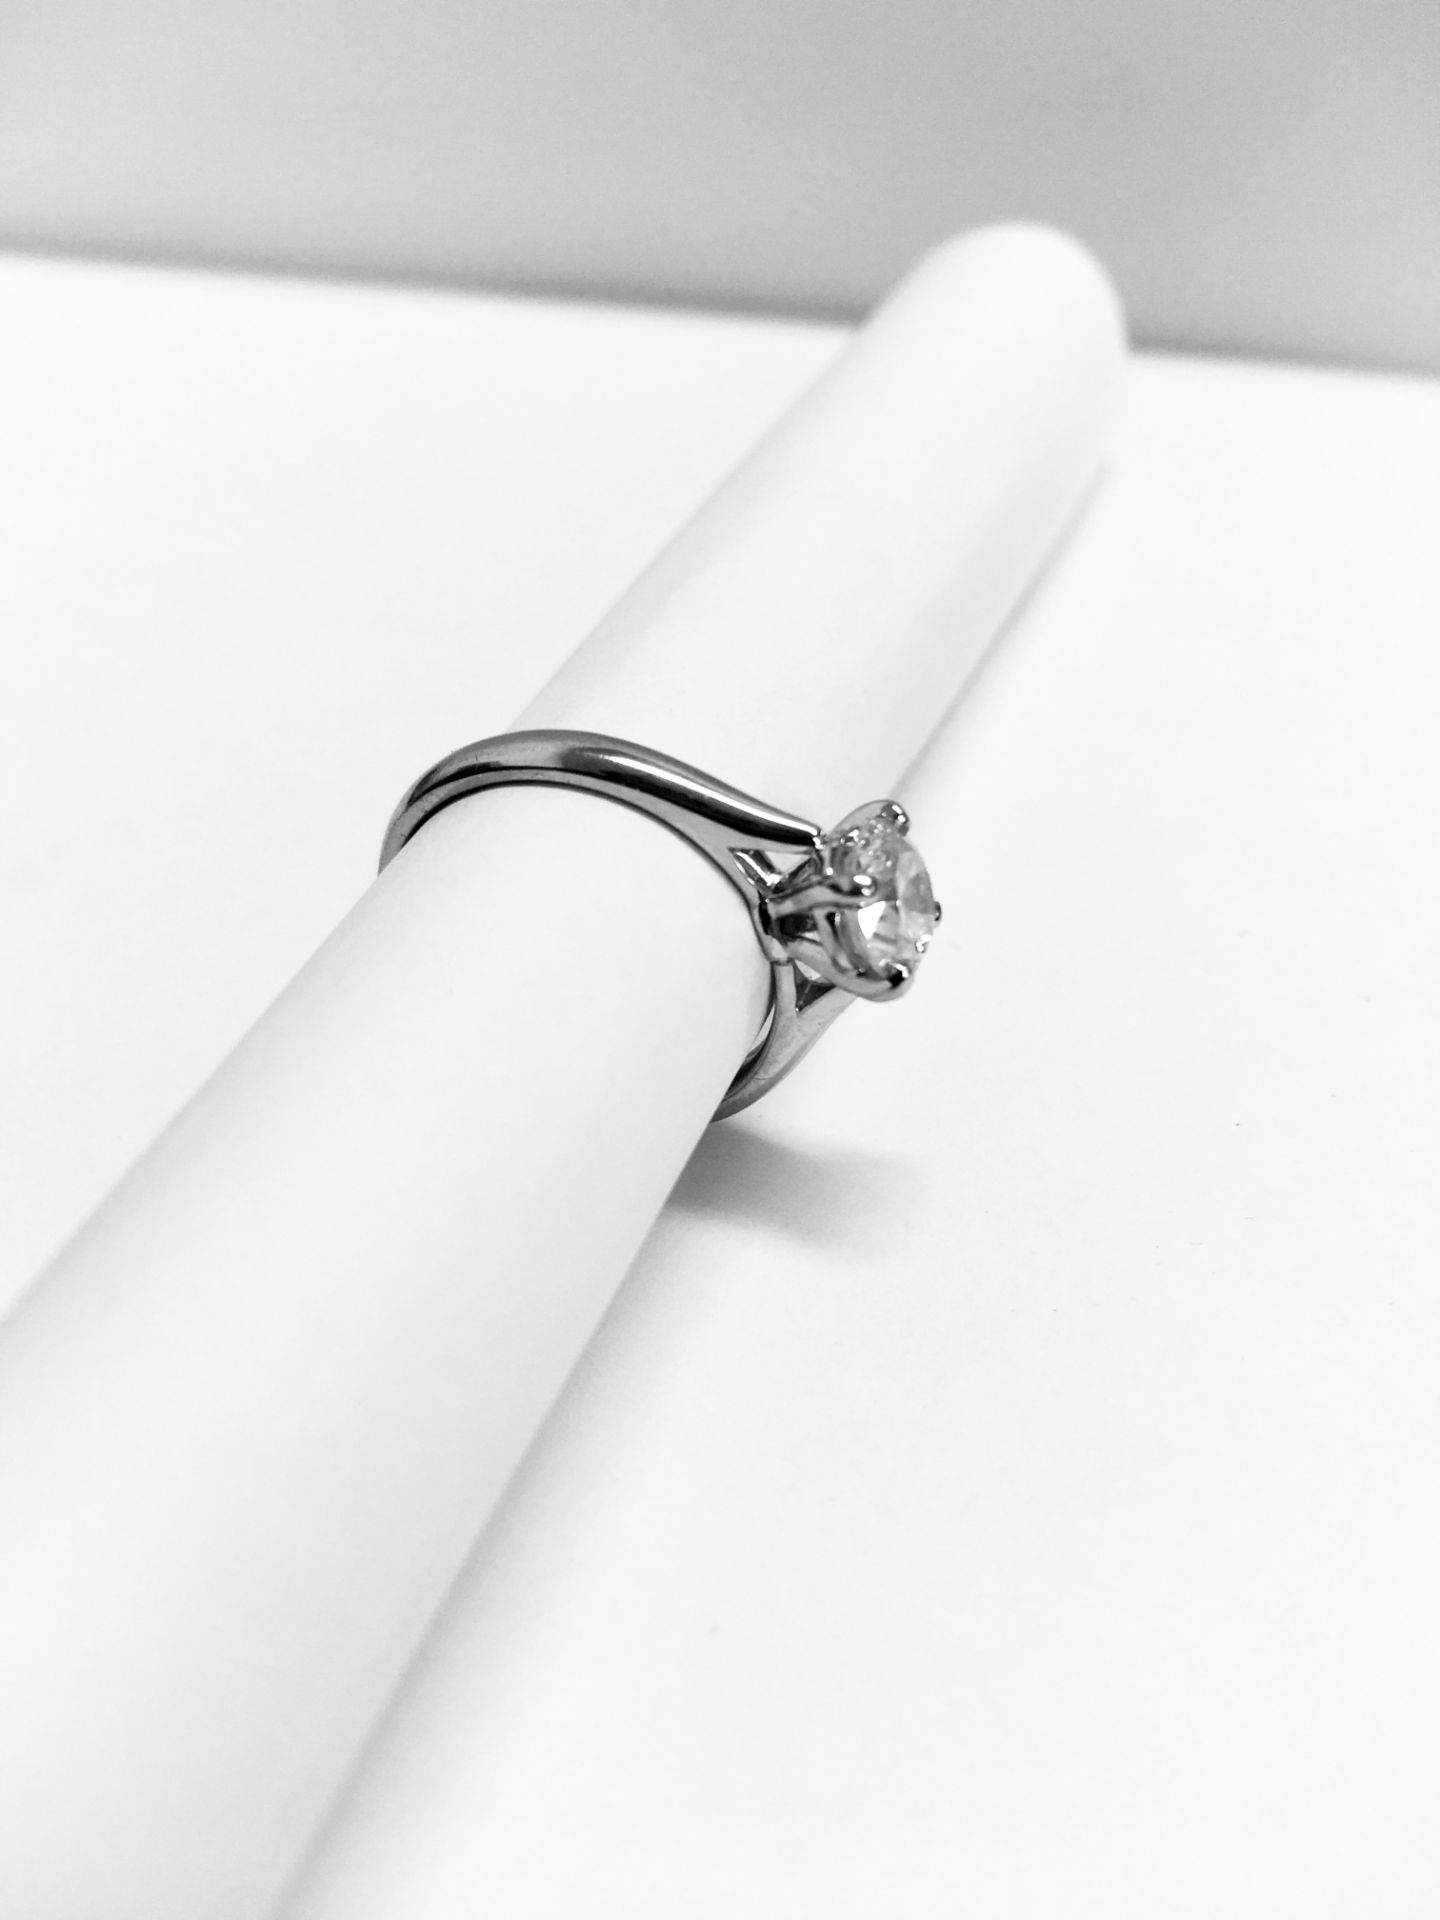 1.04ct Diamond solitaire Ring - Image 6 of 6